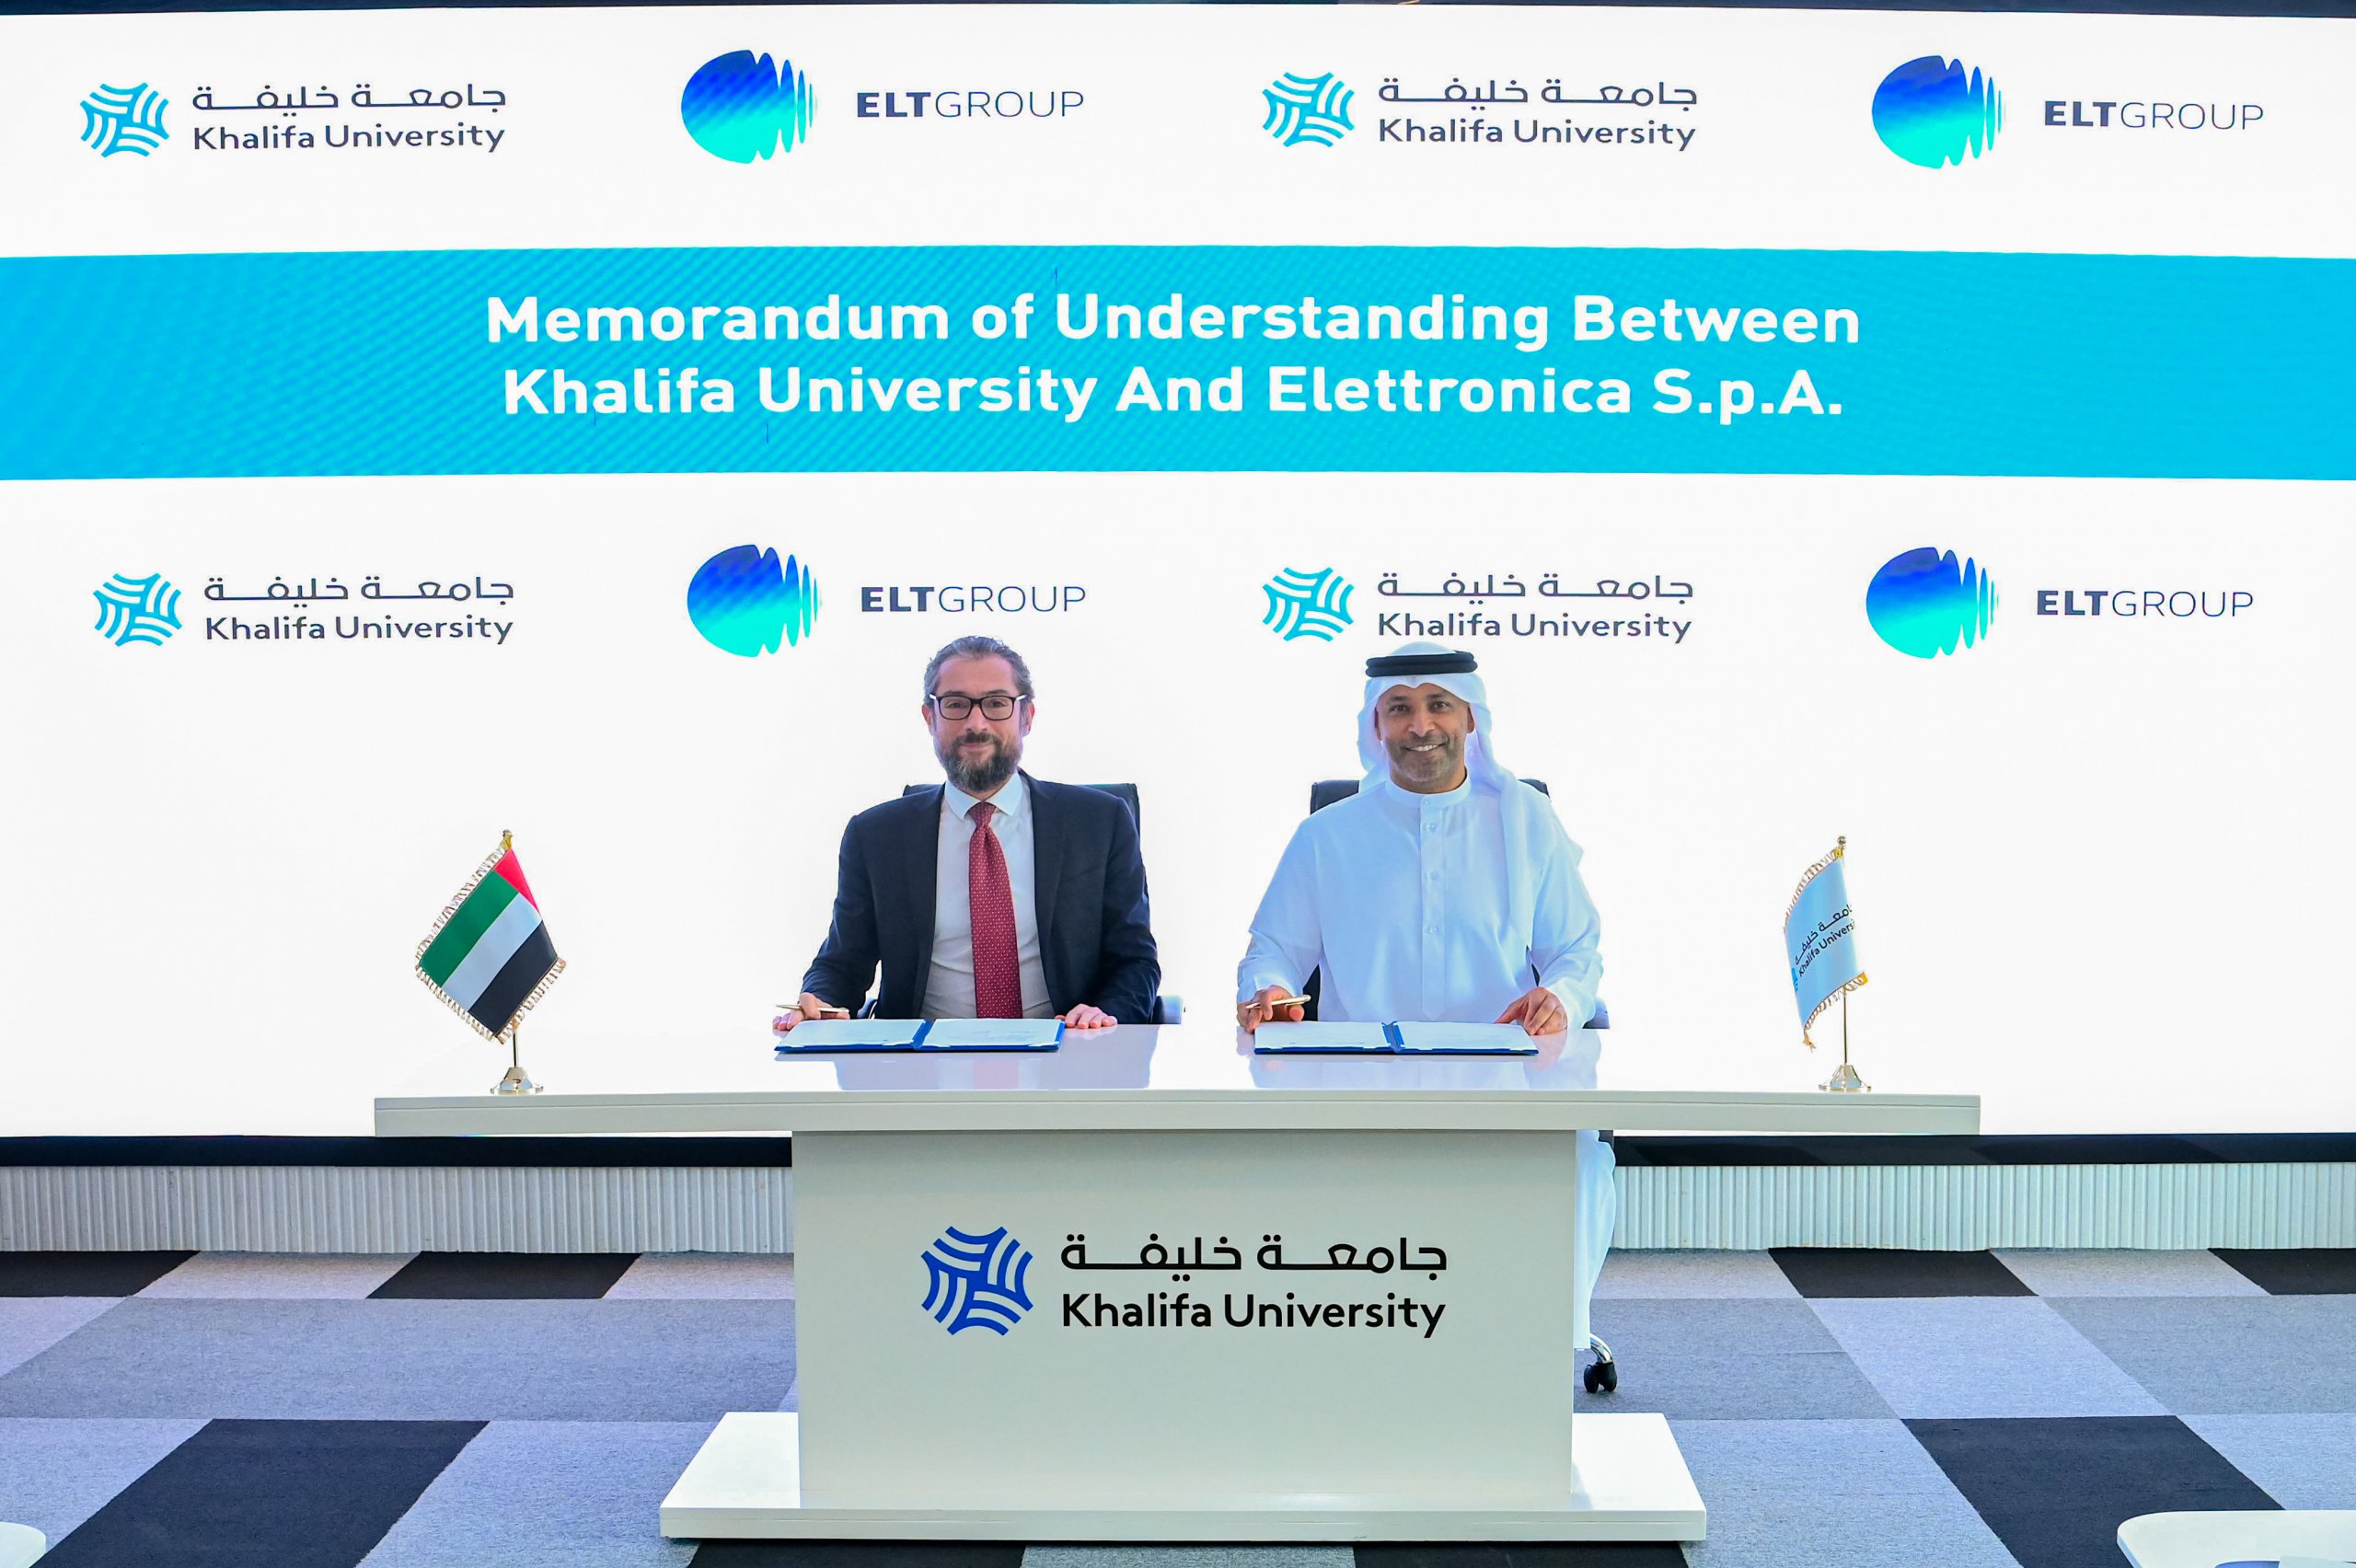 Khalifa University and ELT Group Sign MoU to Establish Center of Excellence in Electromagnetic Spectrum Applications in Abu Dhabi